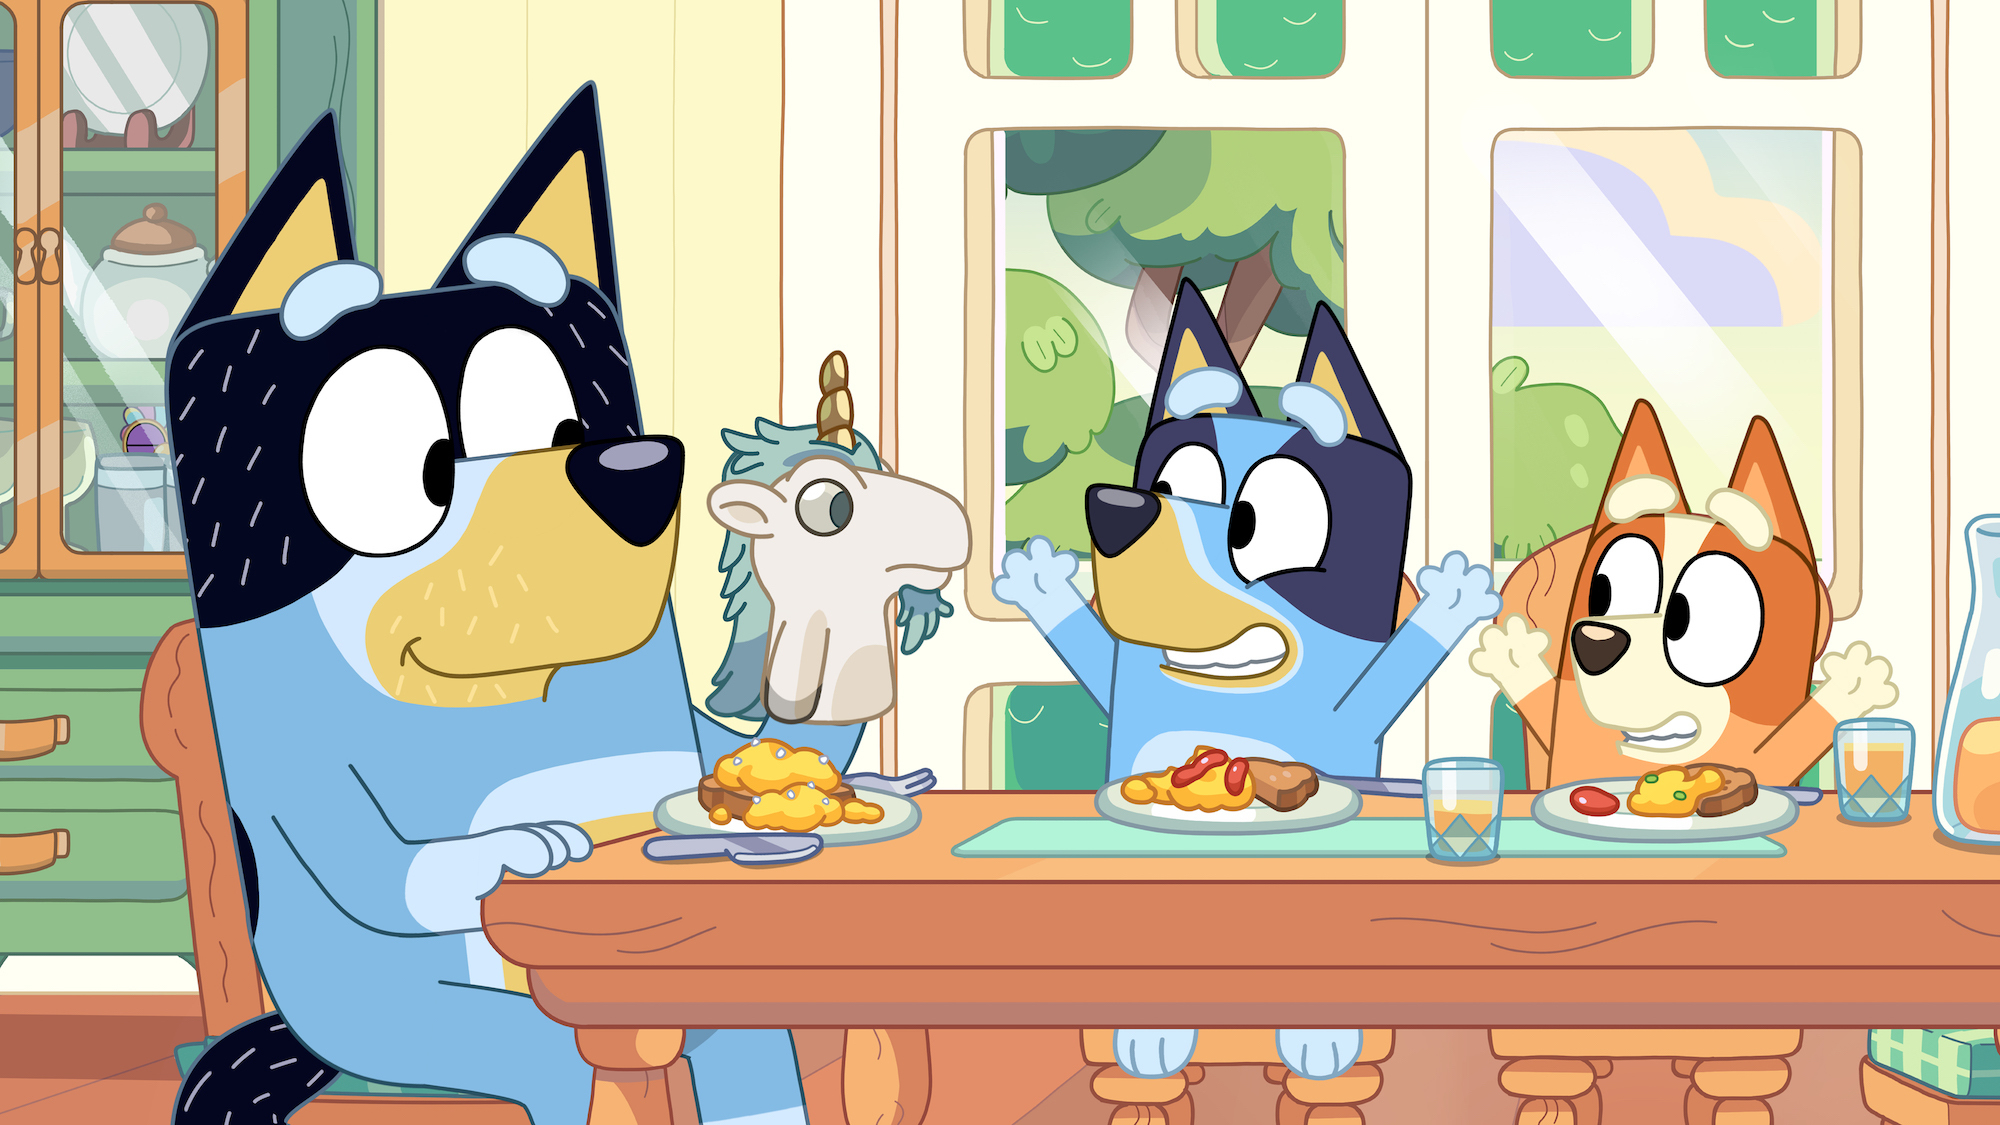 Animated characters Bluey, Bingo, and their parents eating at a table